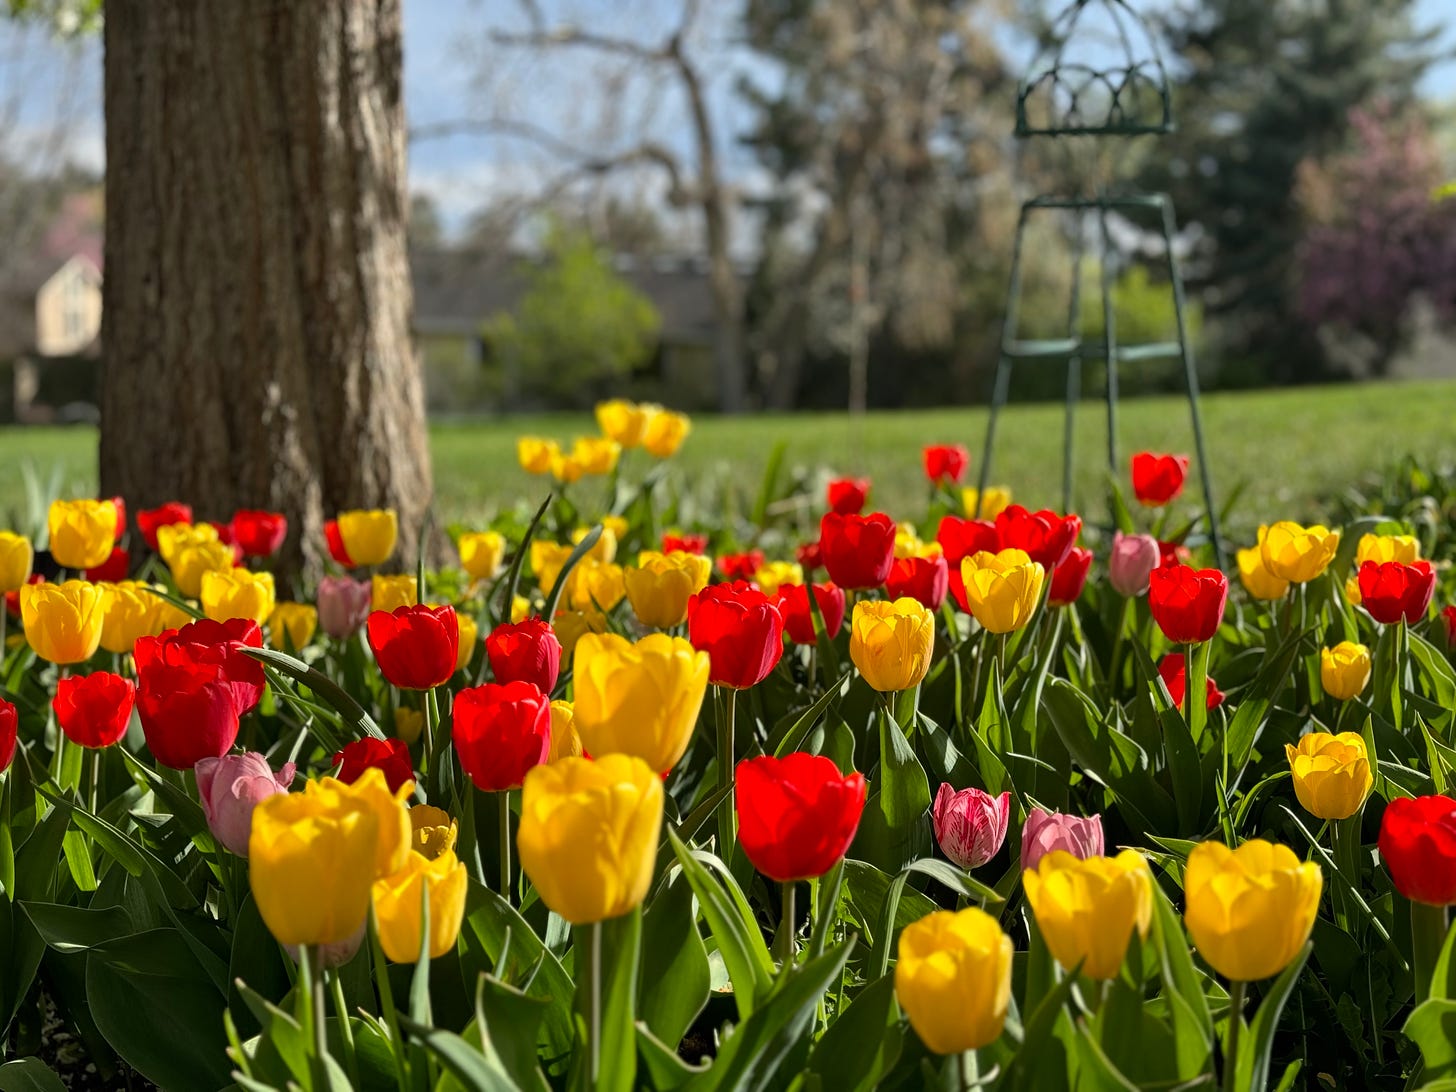 A group of yellow and red tulips on a sunny day